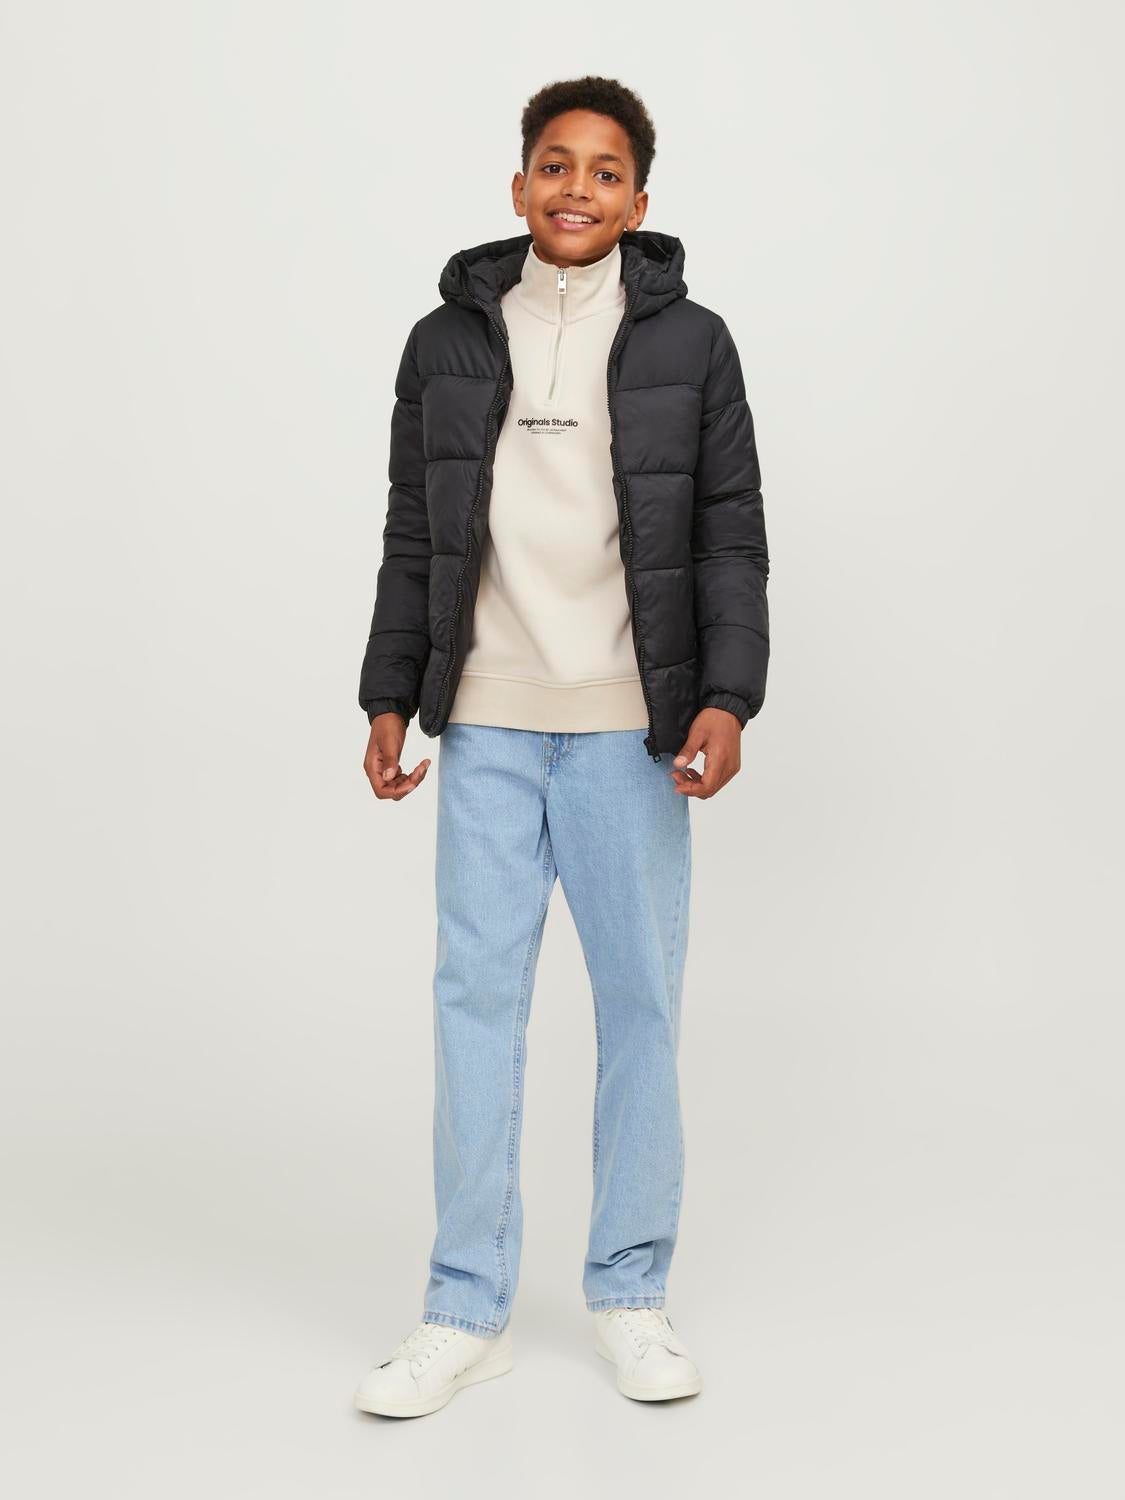 JJICHRIS JJIORIGINAL SQ 956 Relaxed Fit Jeans For boys